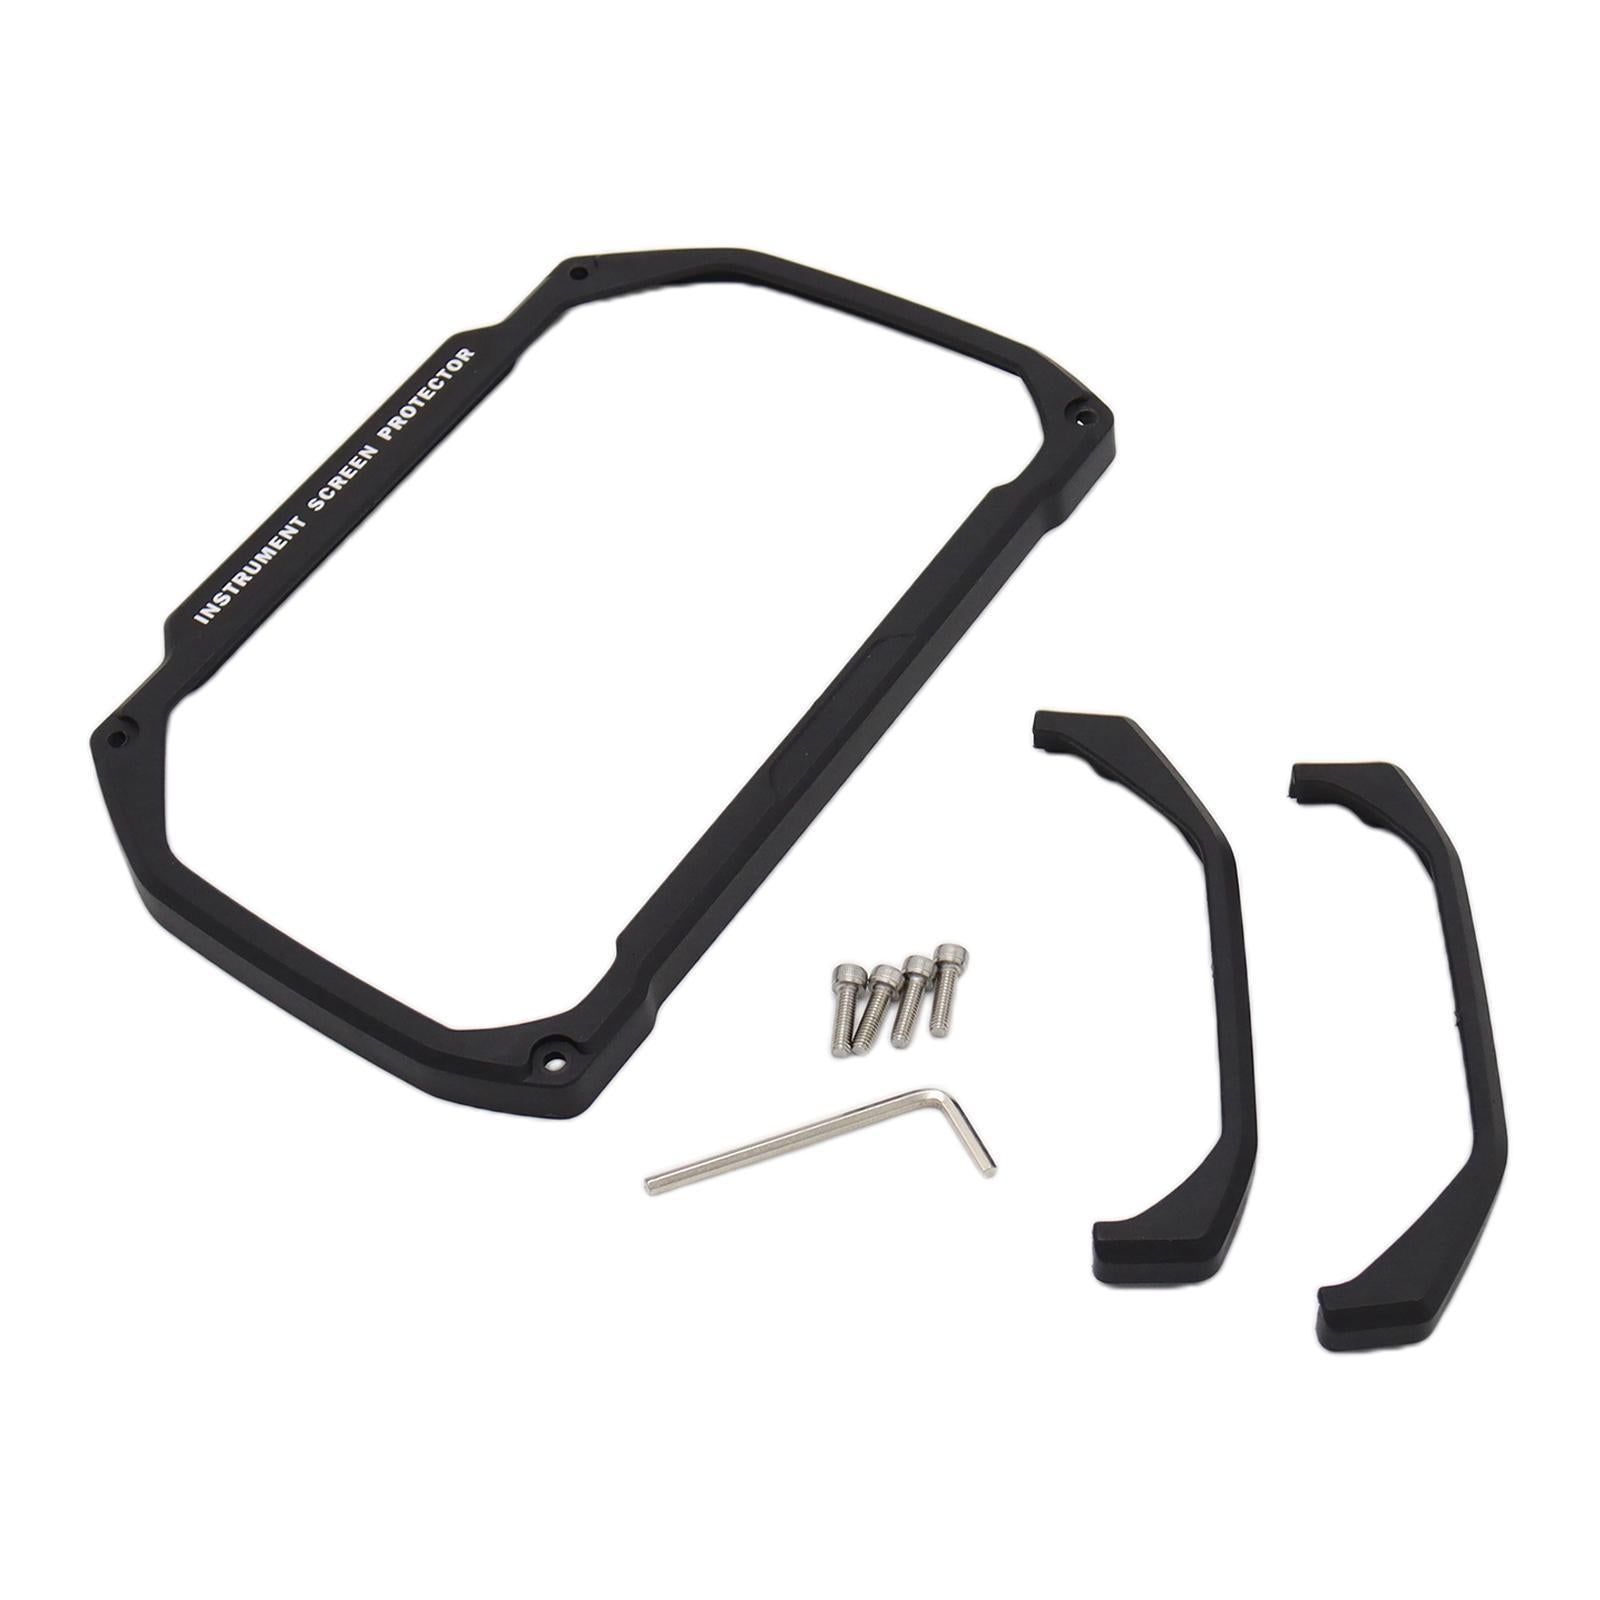 Meter Frame Cover Instrument Screen Protector for BMW R1200GS R1250GS F900